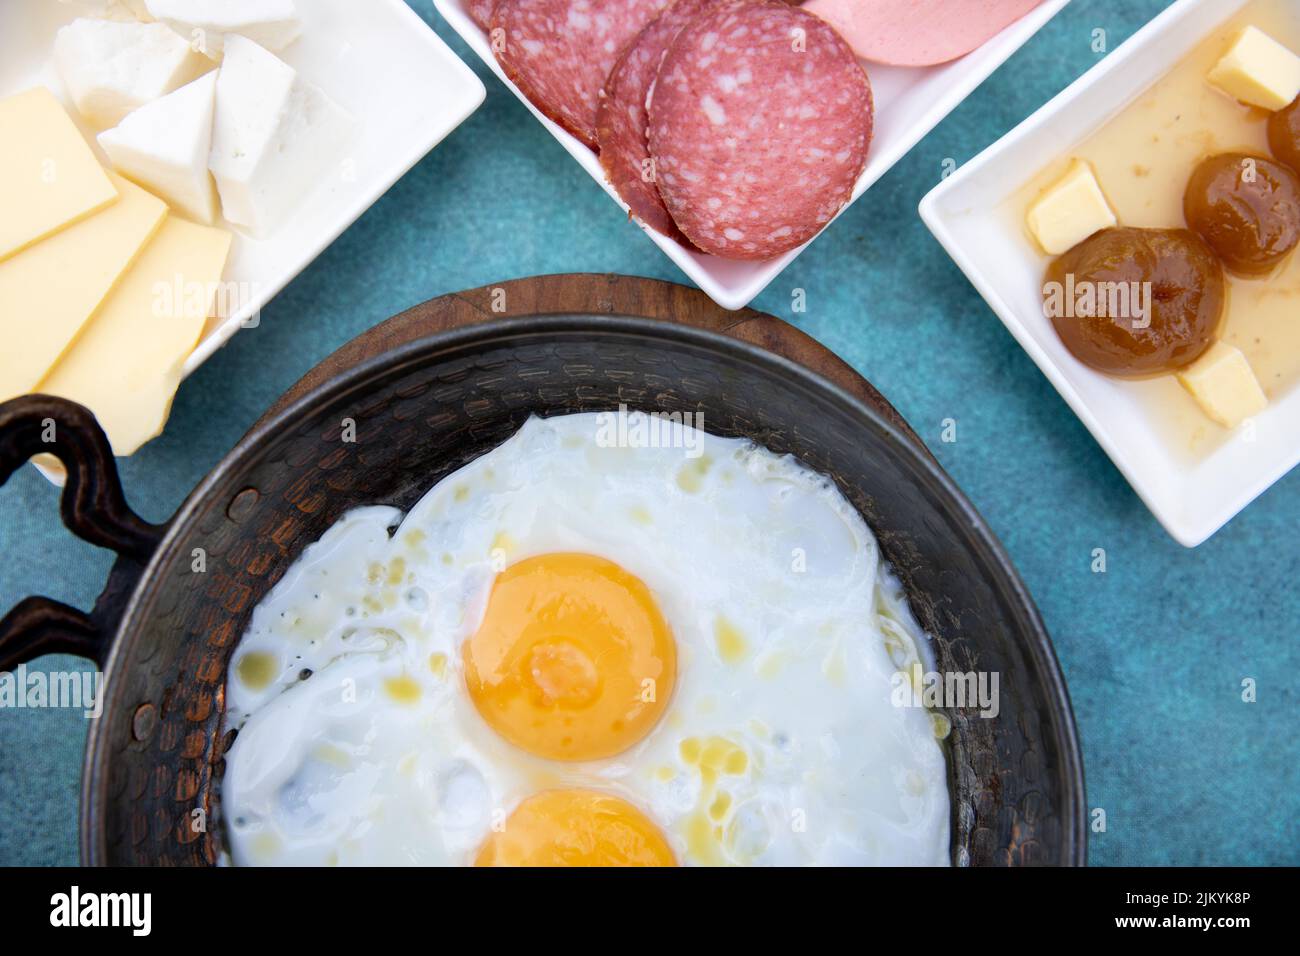 A top view of a breakfast table with sunny side up eggs in a pan and cheeses, cured meats, and jam Stock Photo